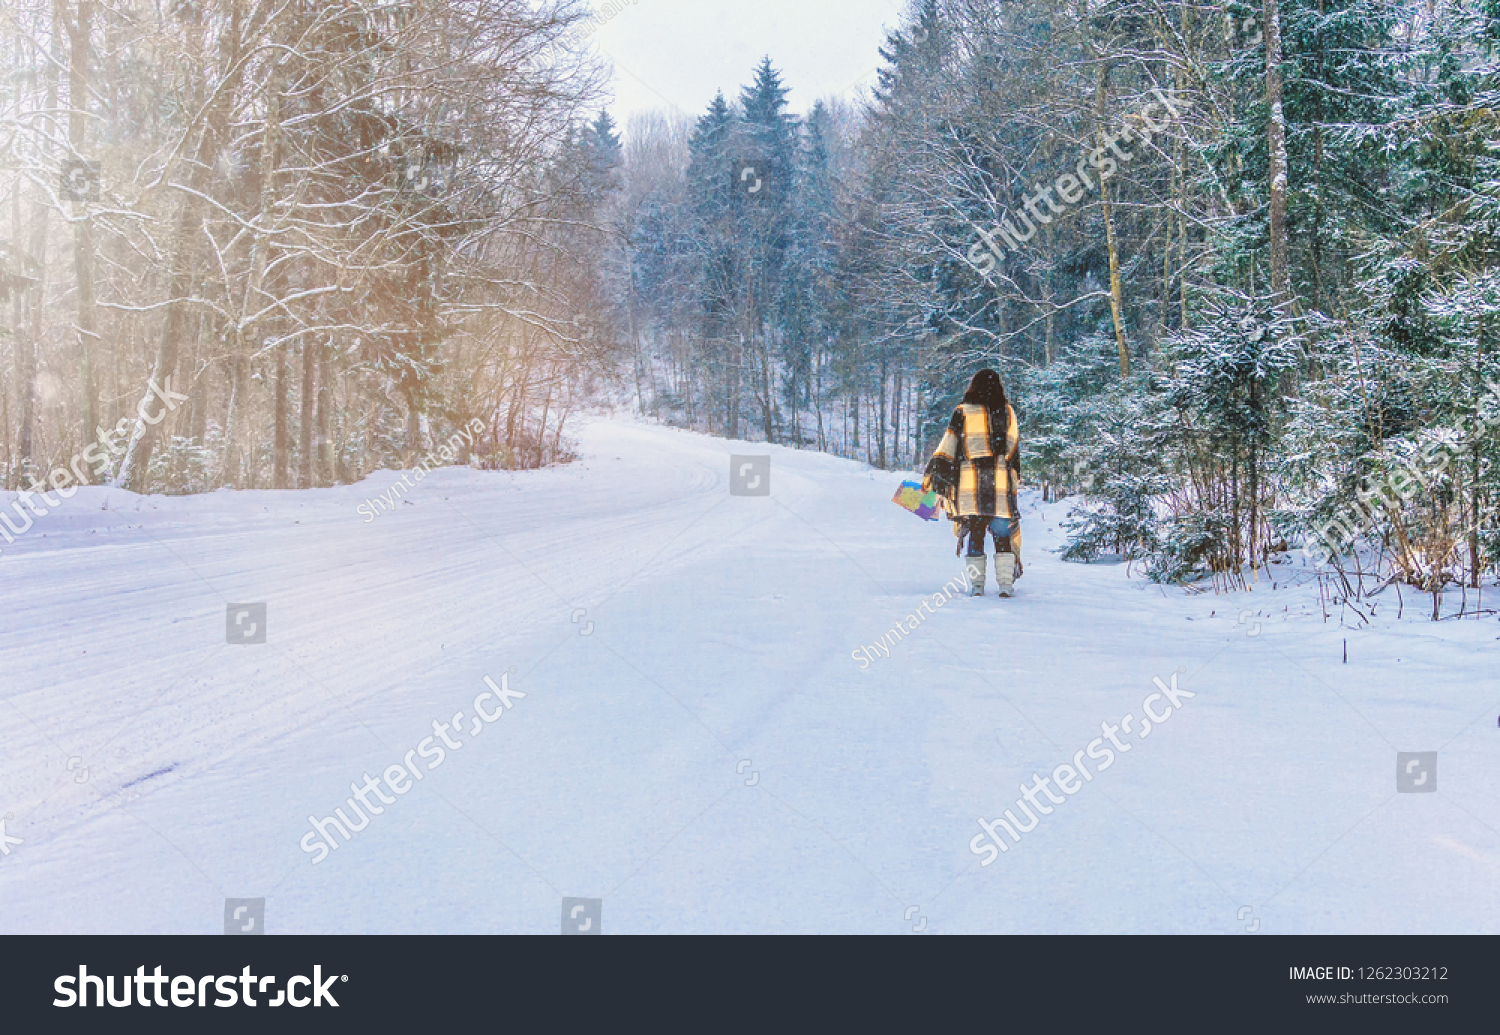 Beautiful woman standing among snowy trees in winter forest and enjoying first snow. Wearing hat, plaid scarf and coat. Wanderlust and boho style #1262303212